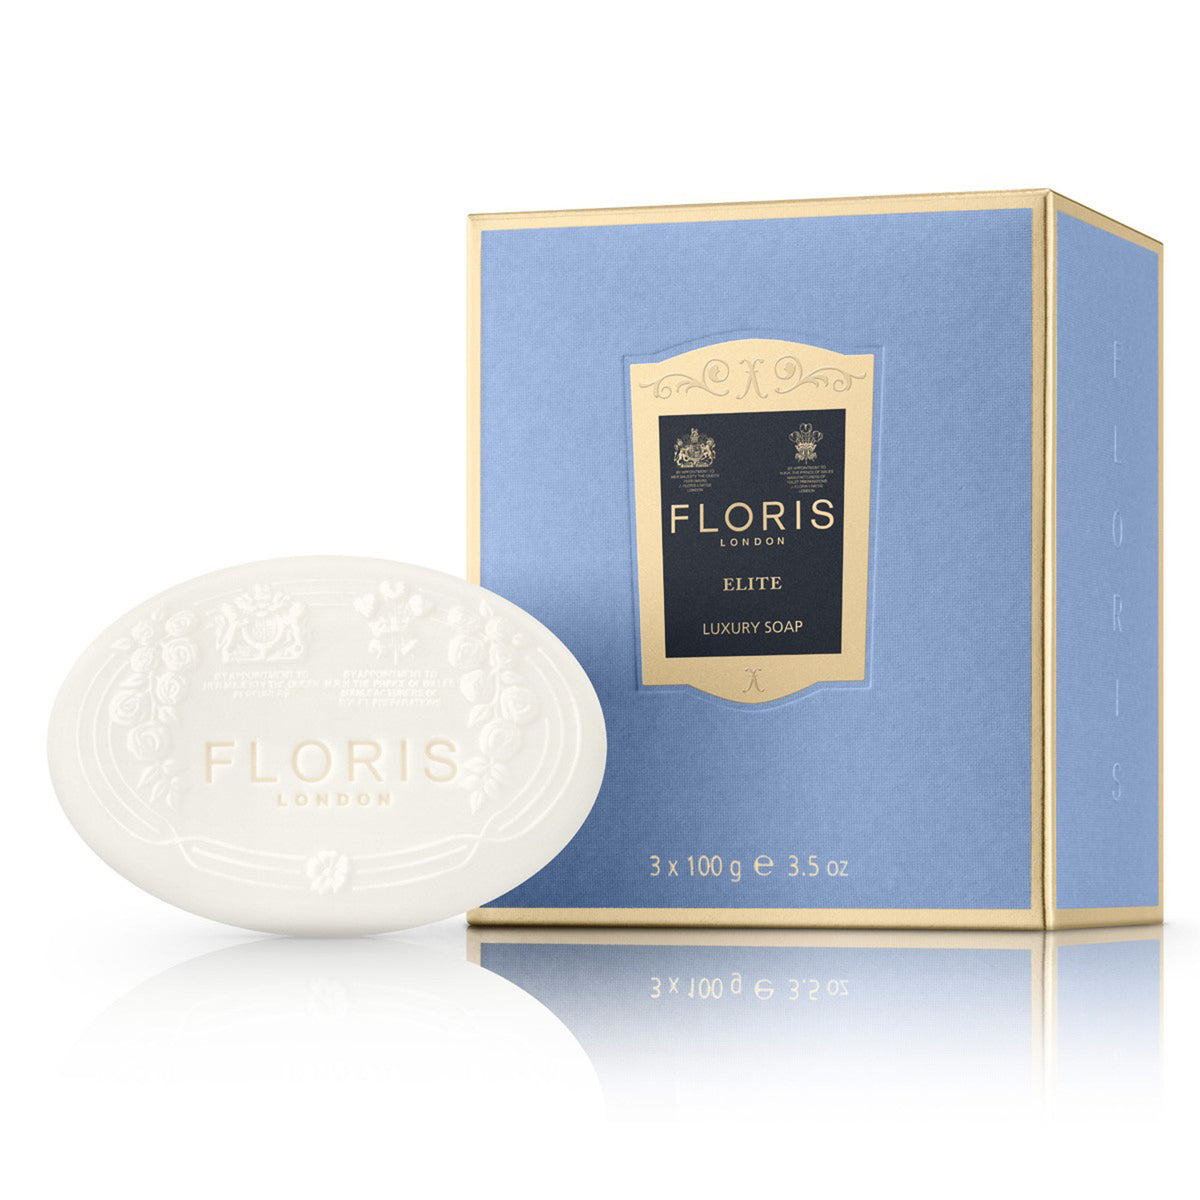 FLORIS Elite Luxury Soap in a blue box, available at KirbyAllison.com.